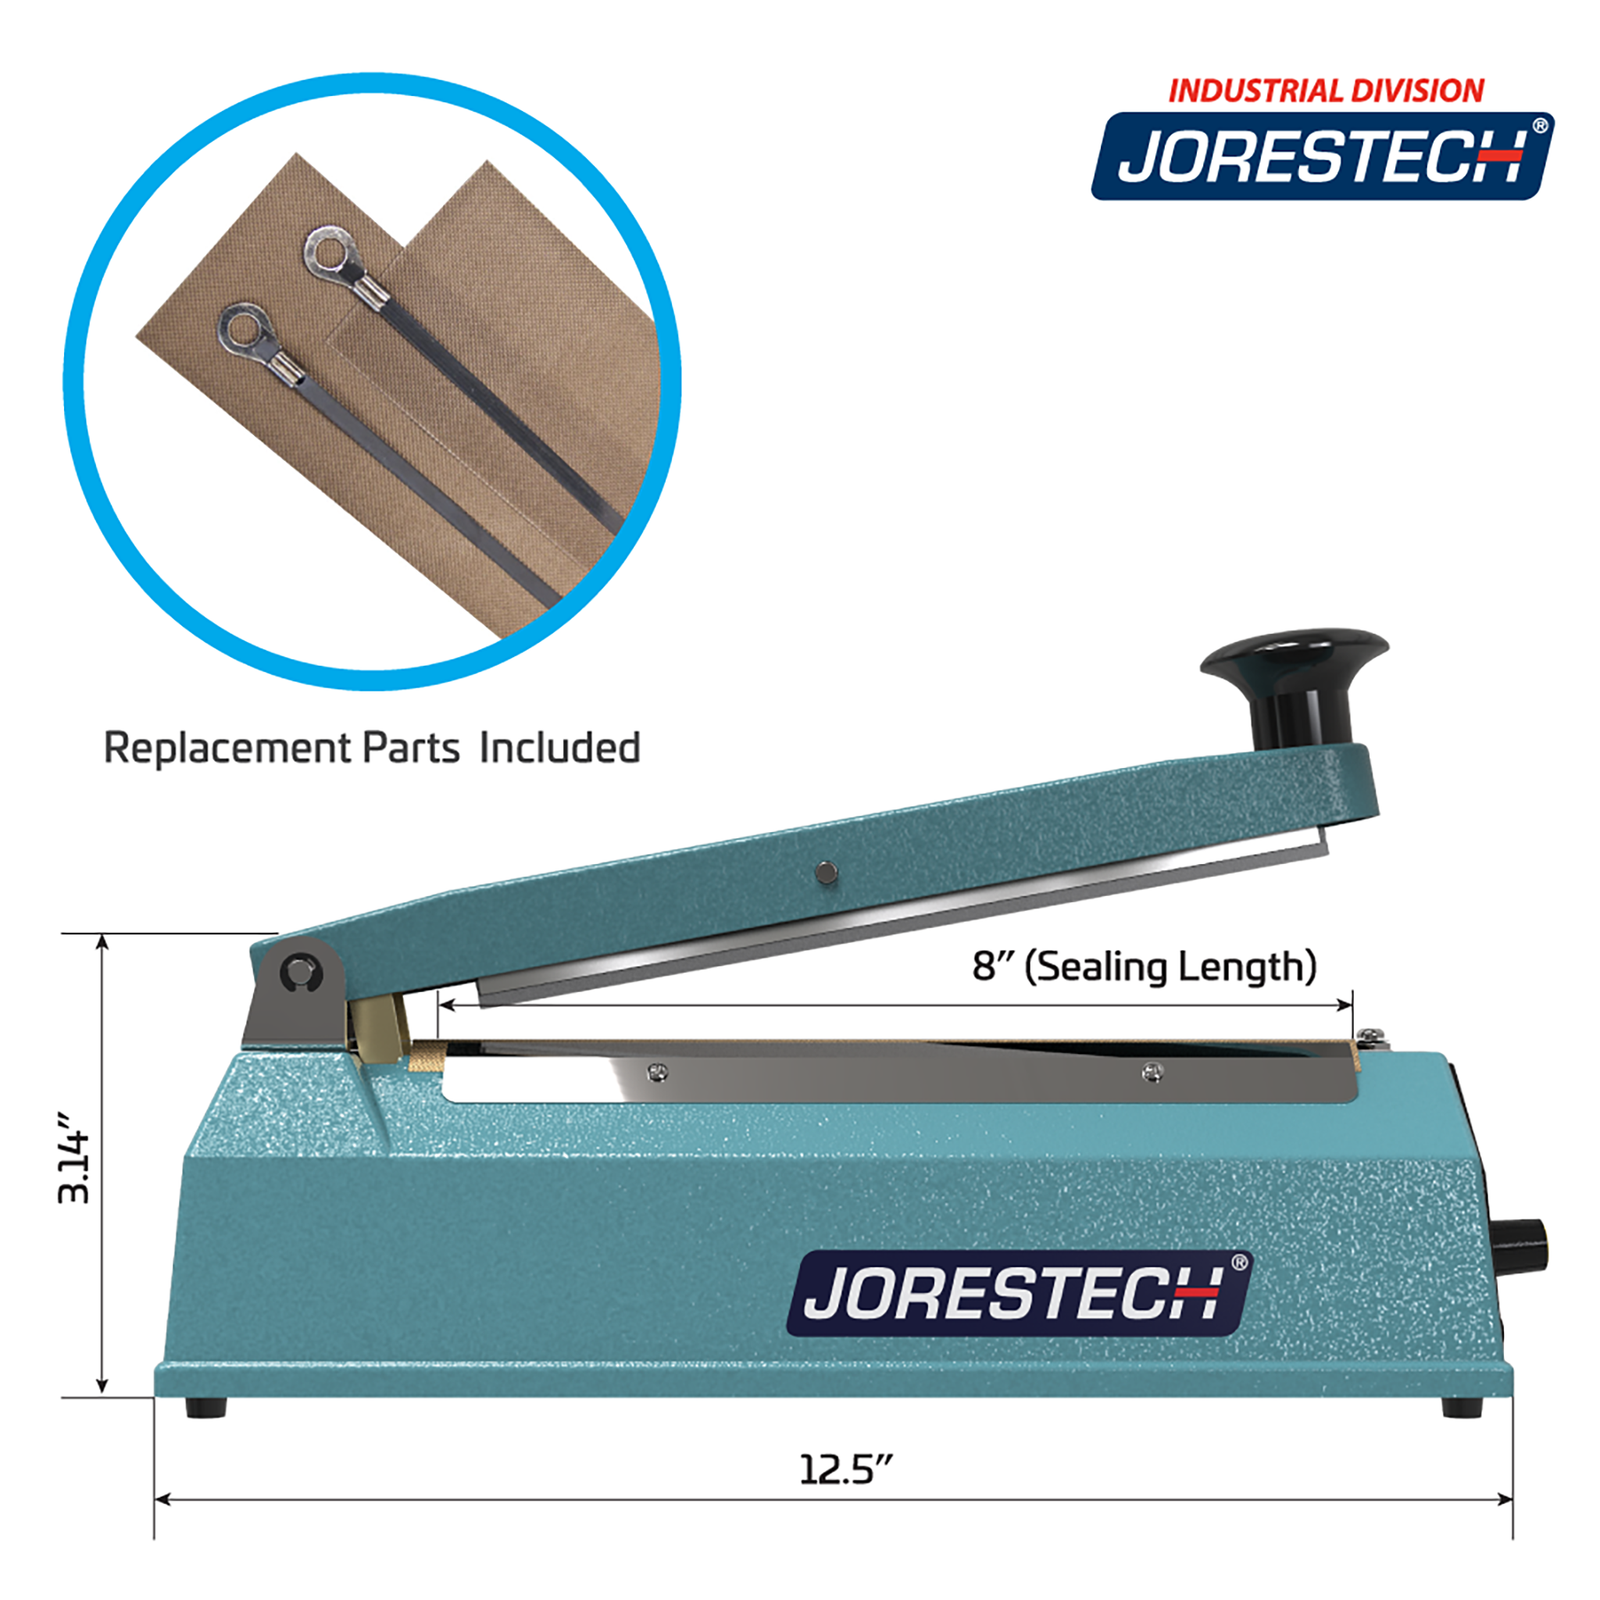 JORESTECH manual impulse sealer with machine measurements. Highlighted feature reads 